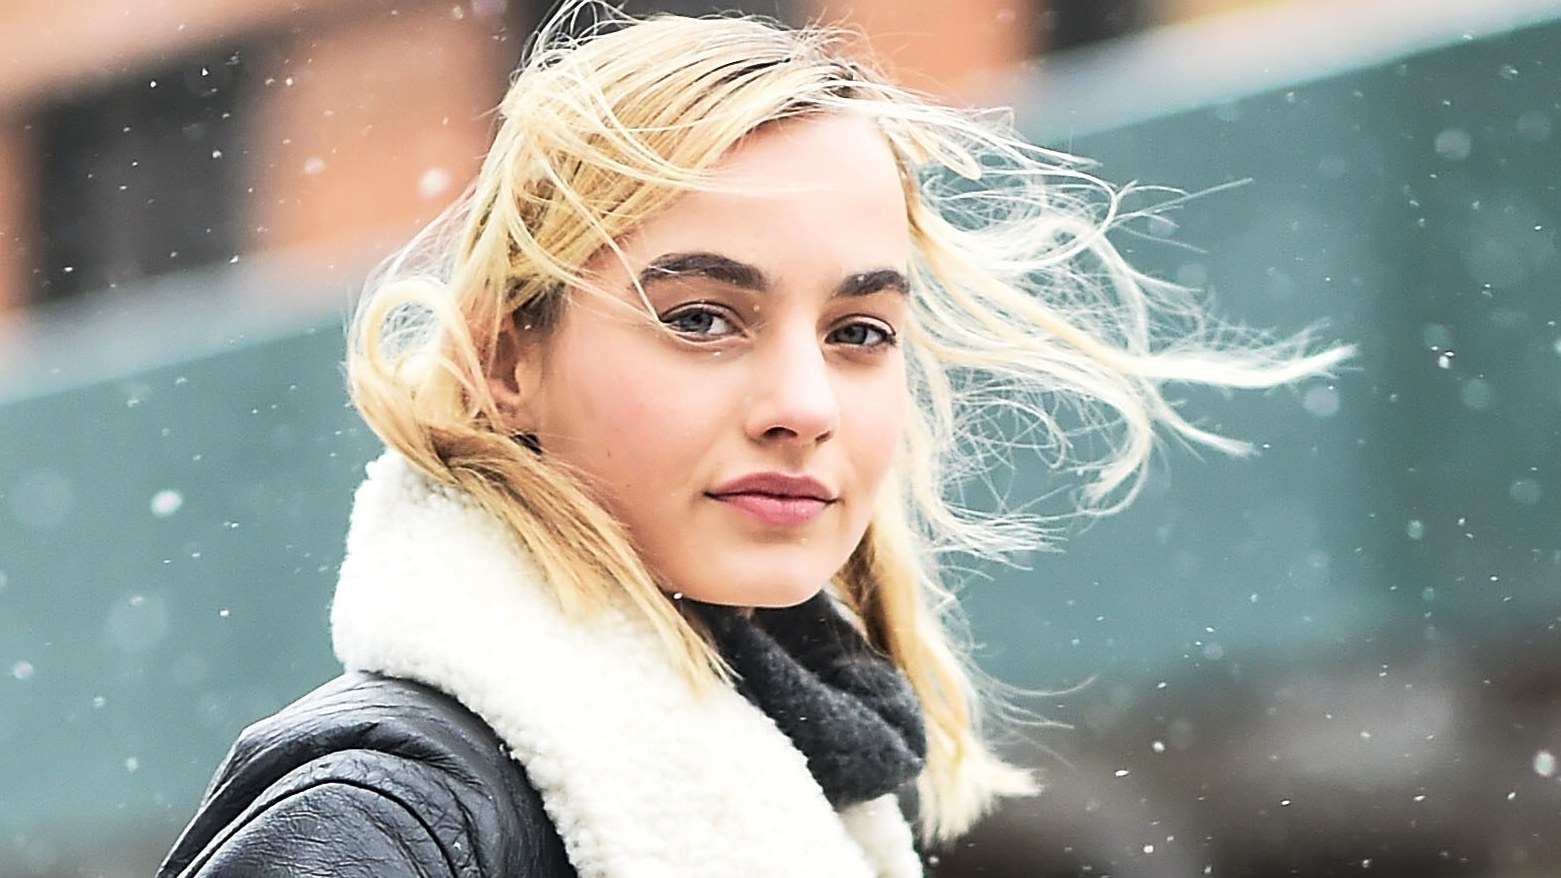 Girl with short blonde hair in snow outside